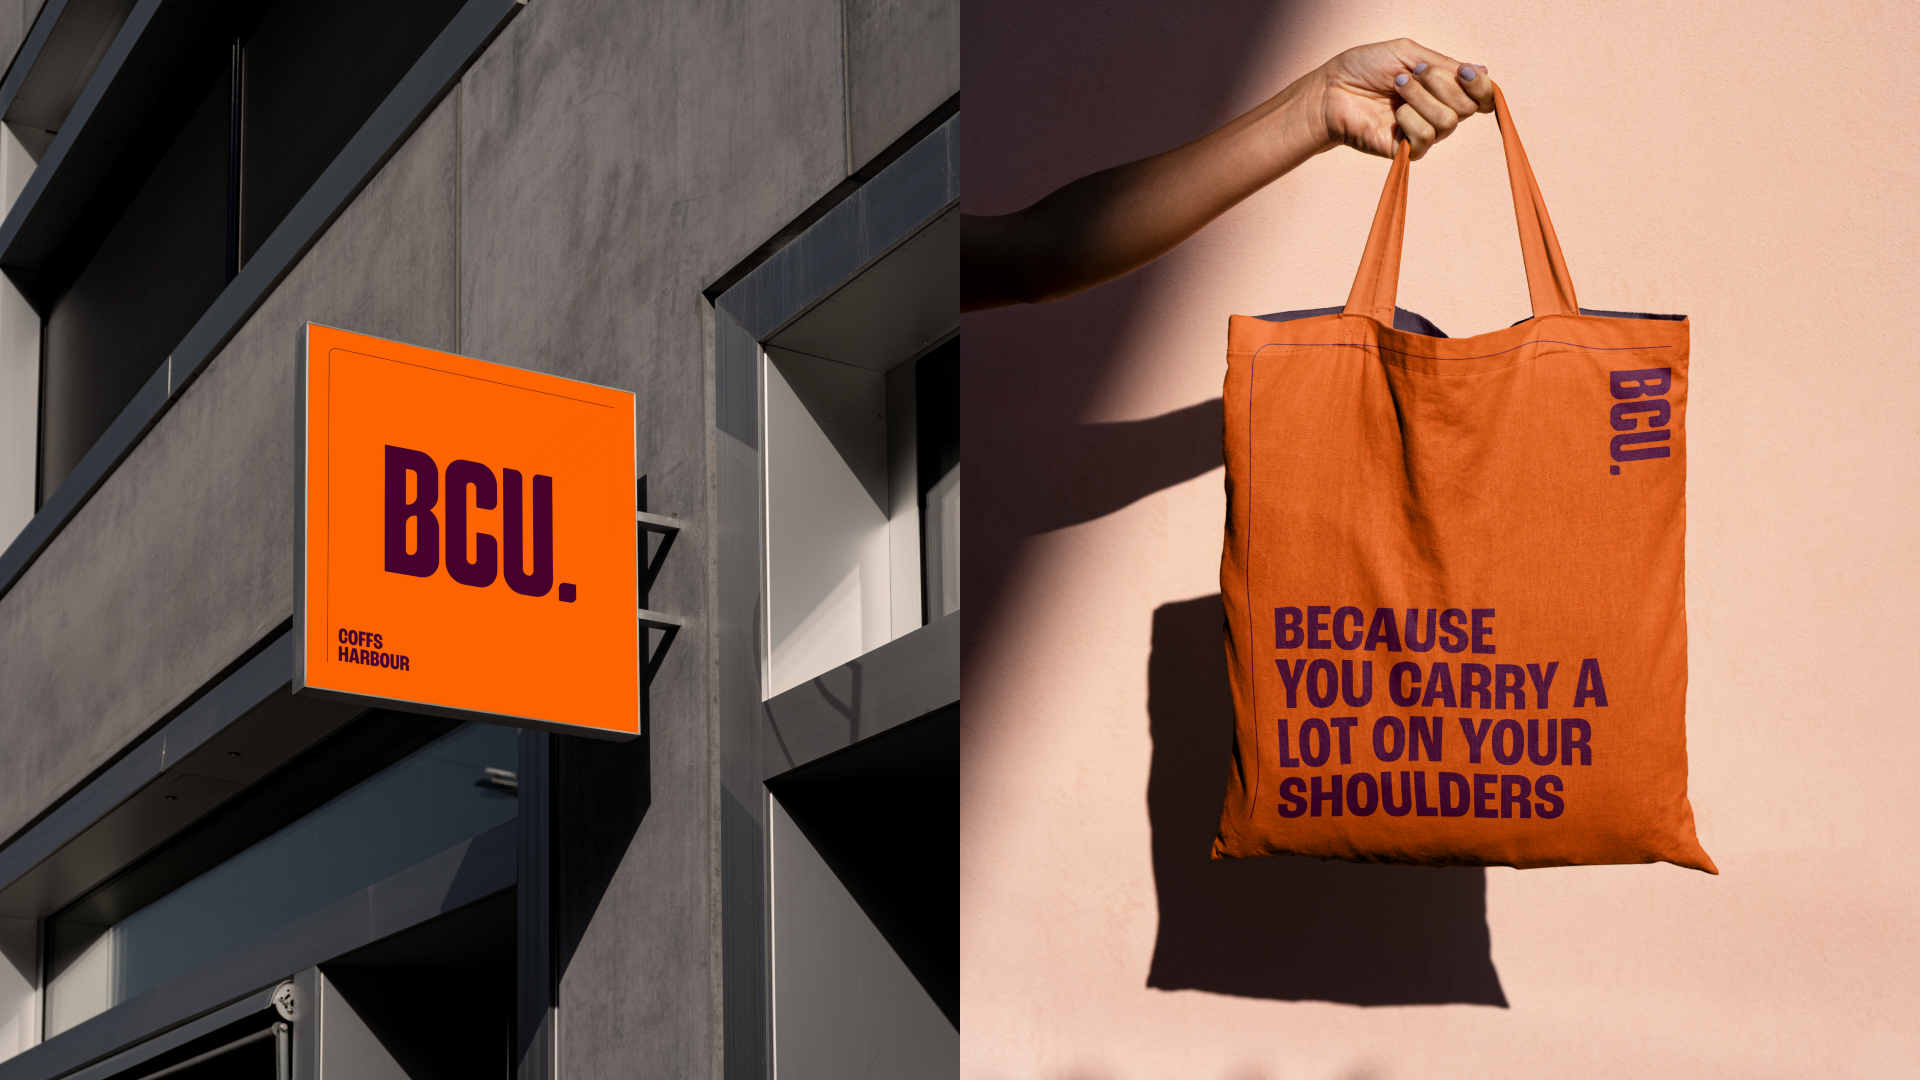 Signage and tote bag for the BCU brand identity